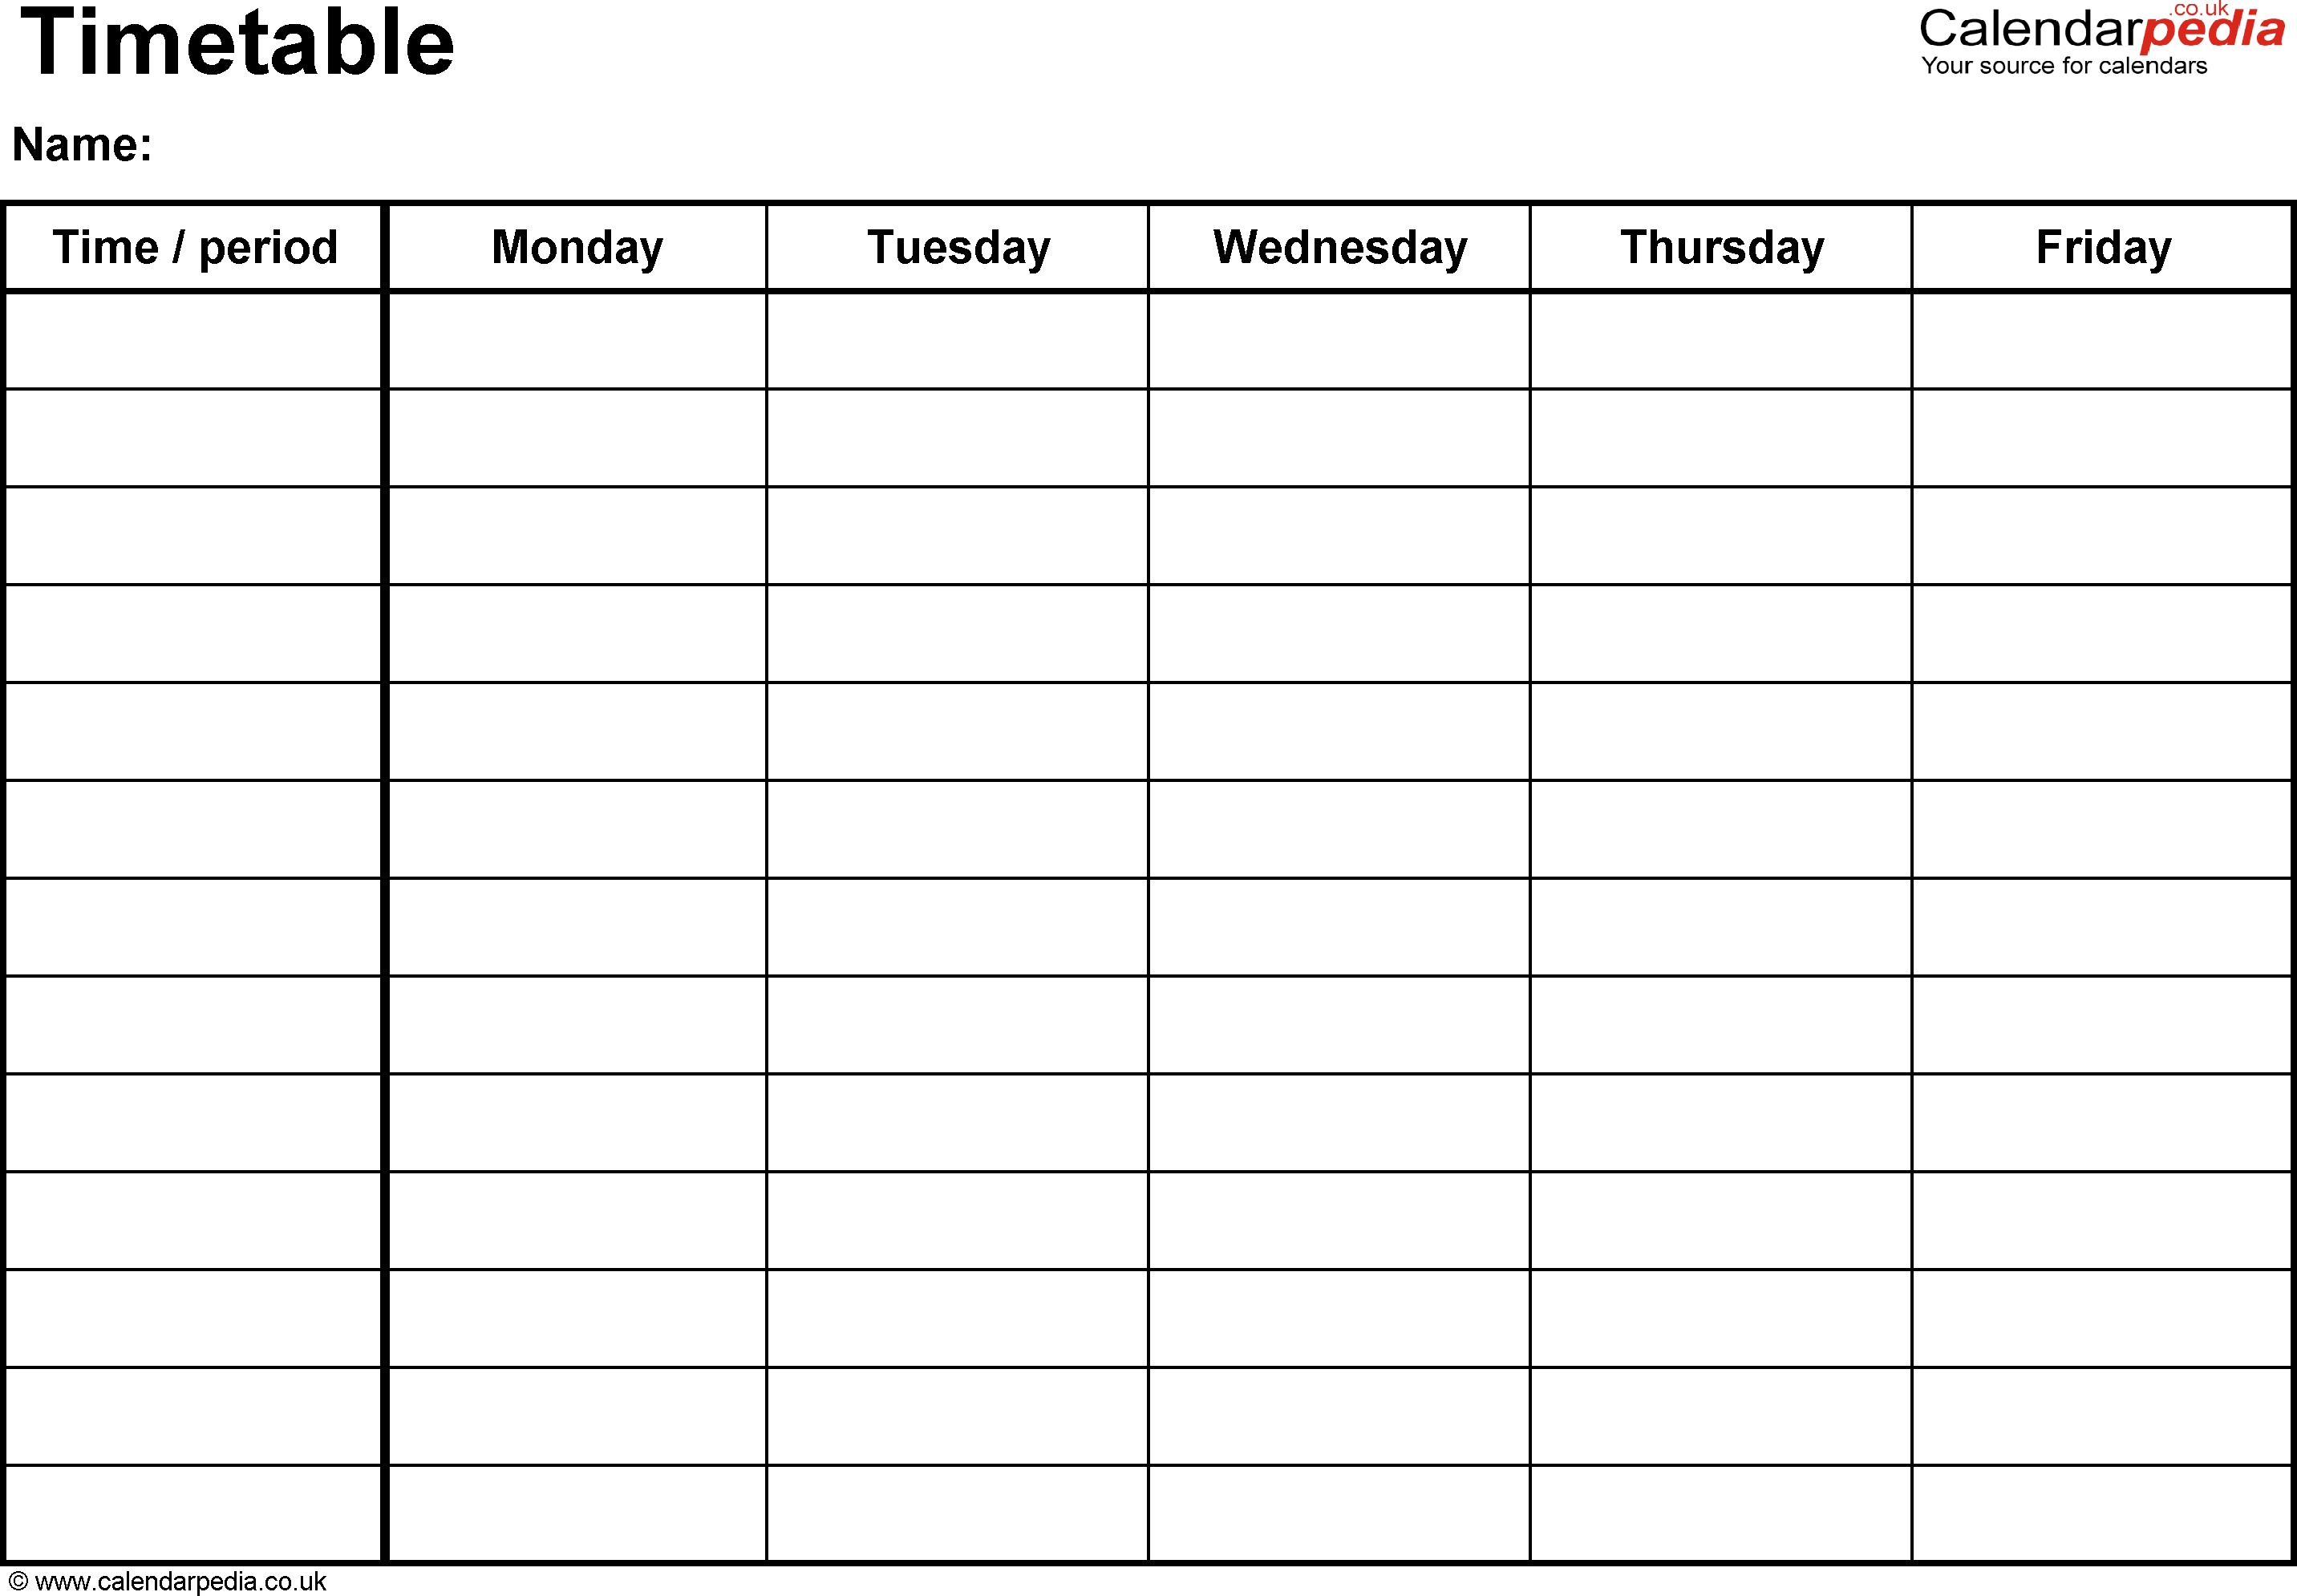 Timetables As Free Printable Templates For Microsoft Word Schedule with regard to Monday Through Friday Schedule Template Free